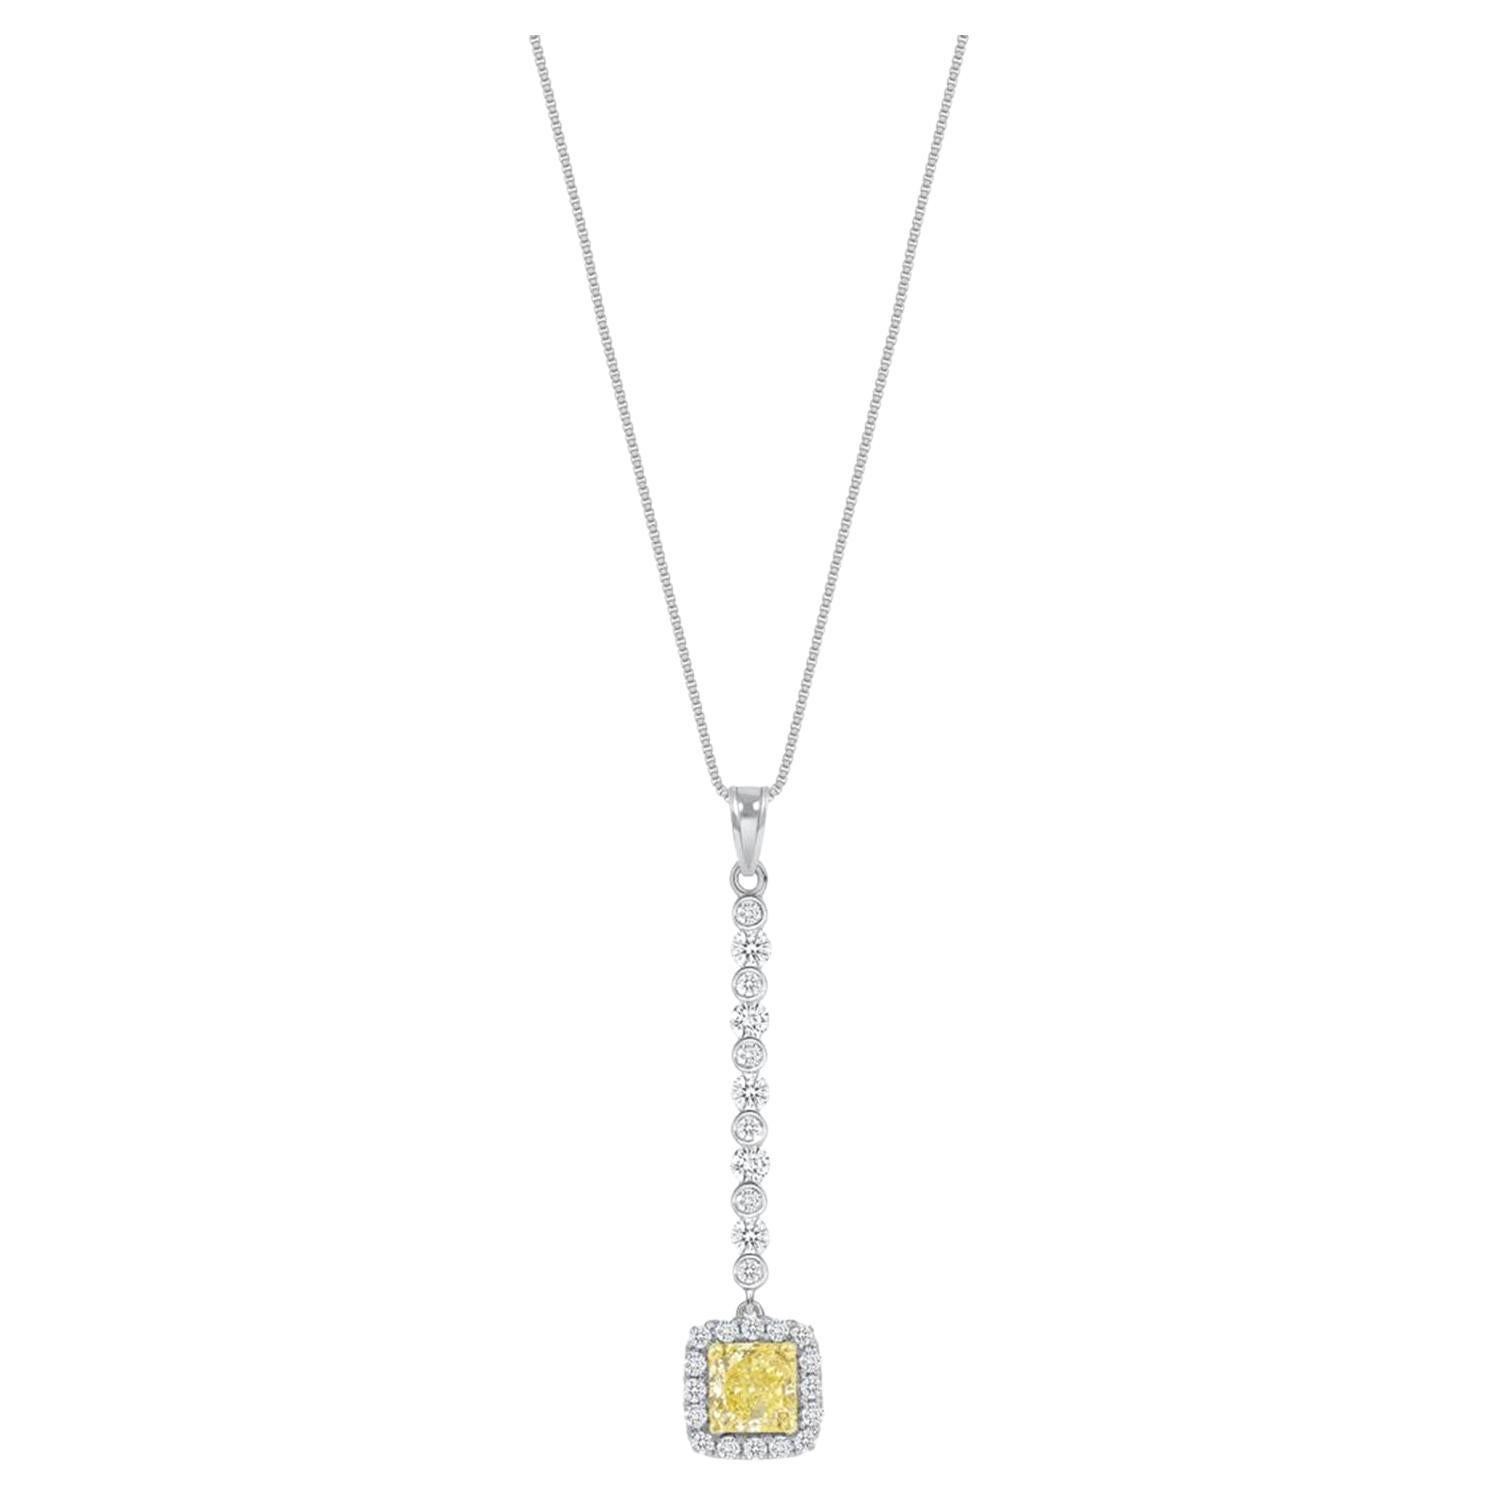 1.79 Carat Yellow and White Diamonds 18k White Gold Drop Necklace